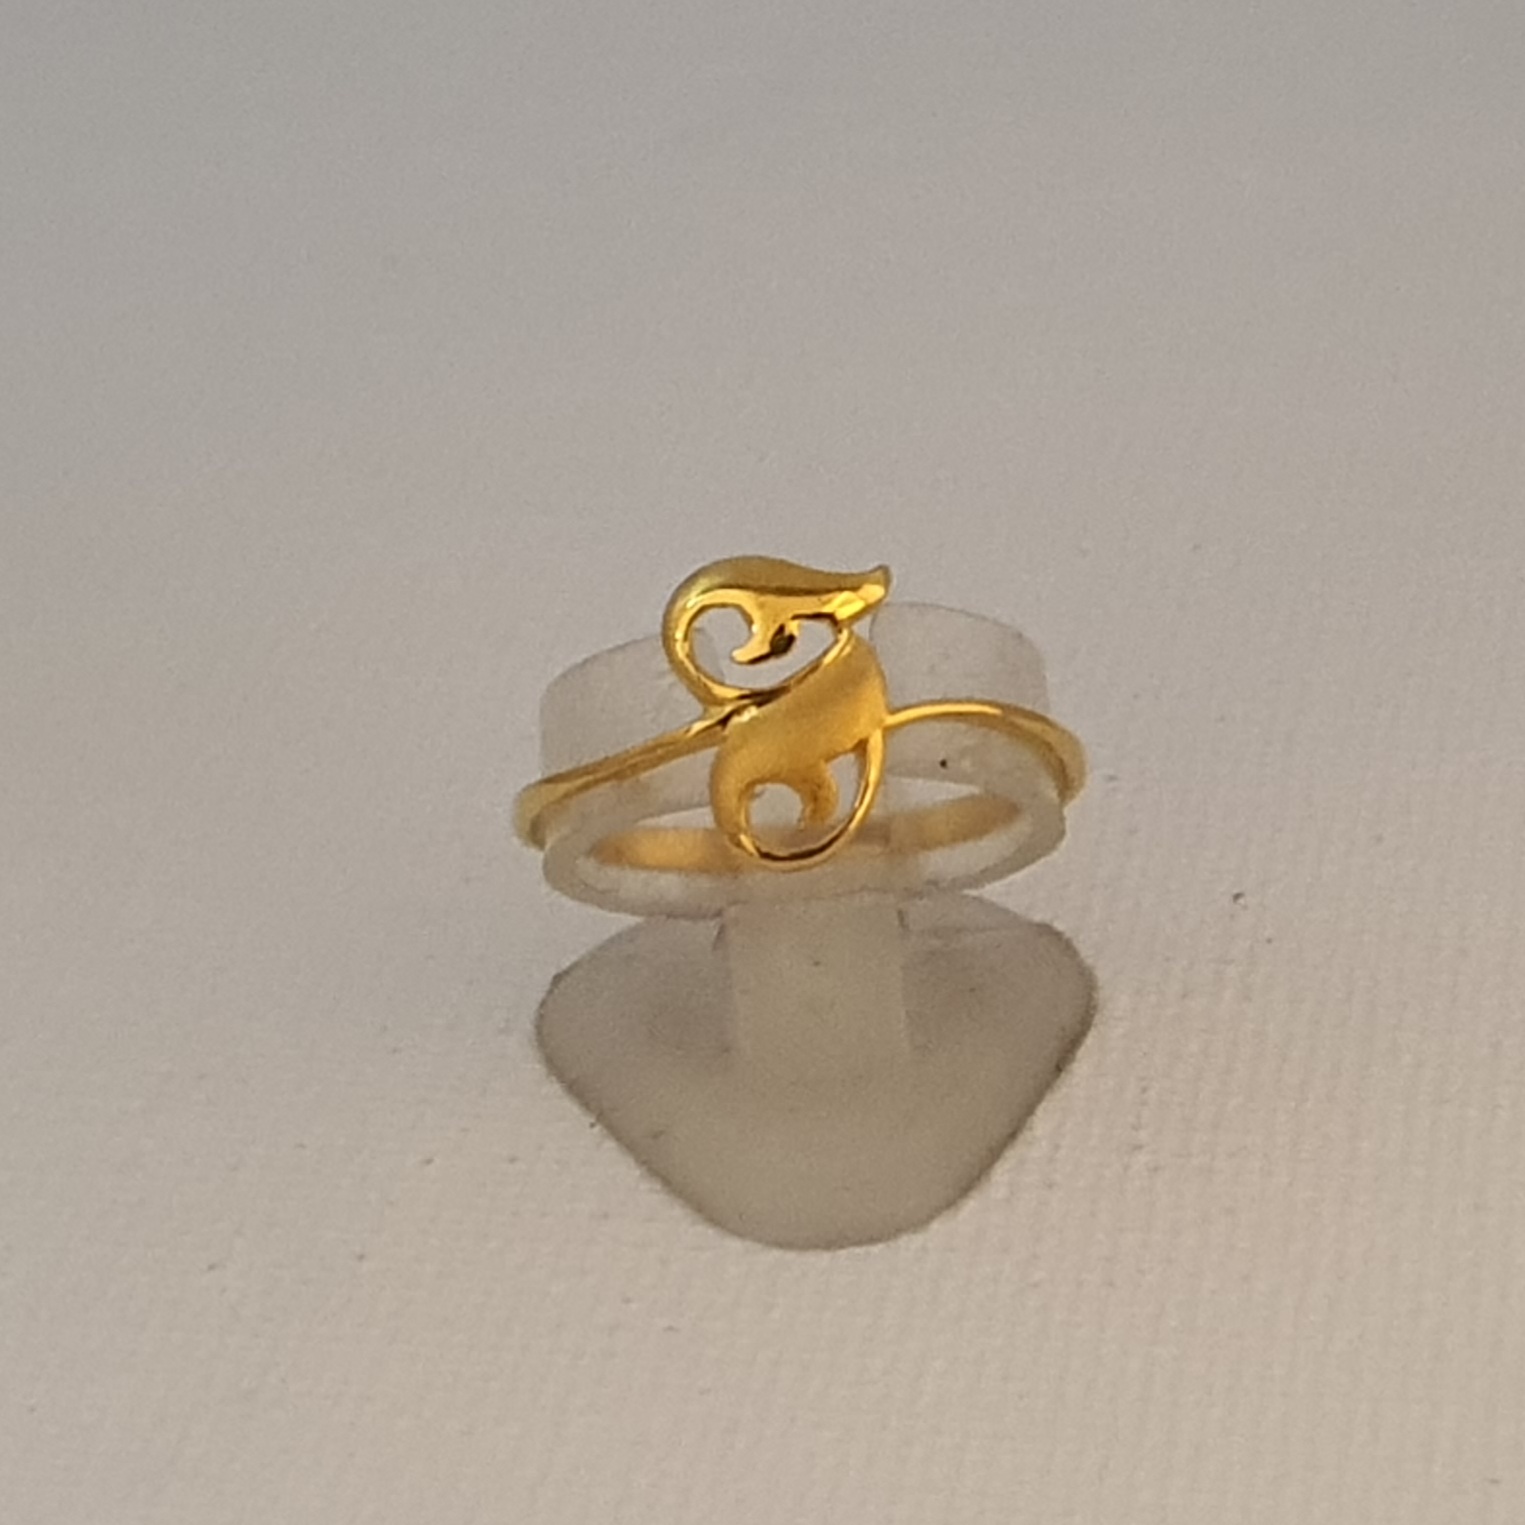 one gold ring price OFF 65% |Newest